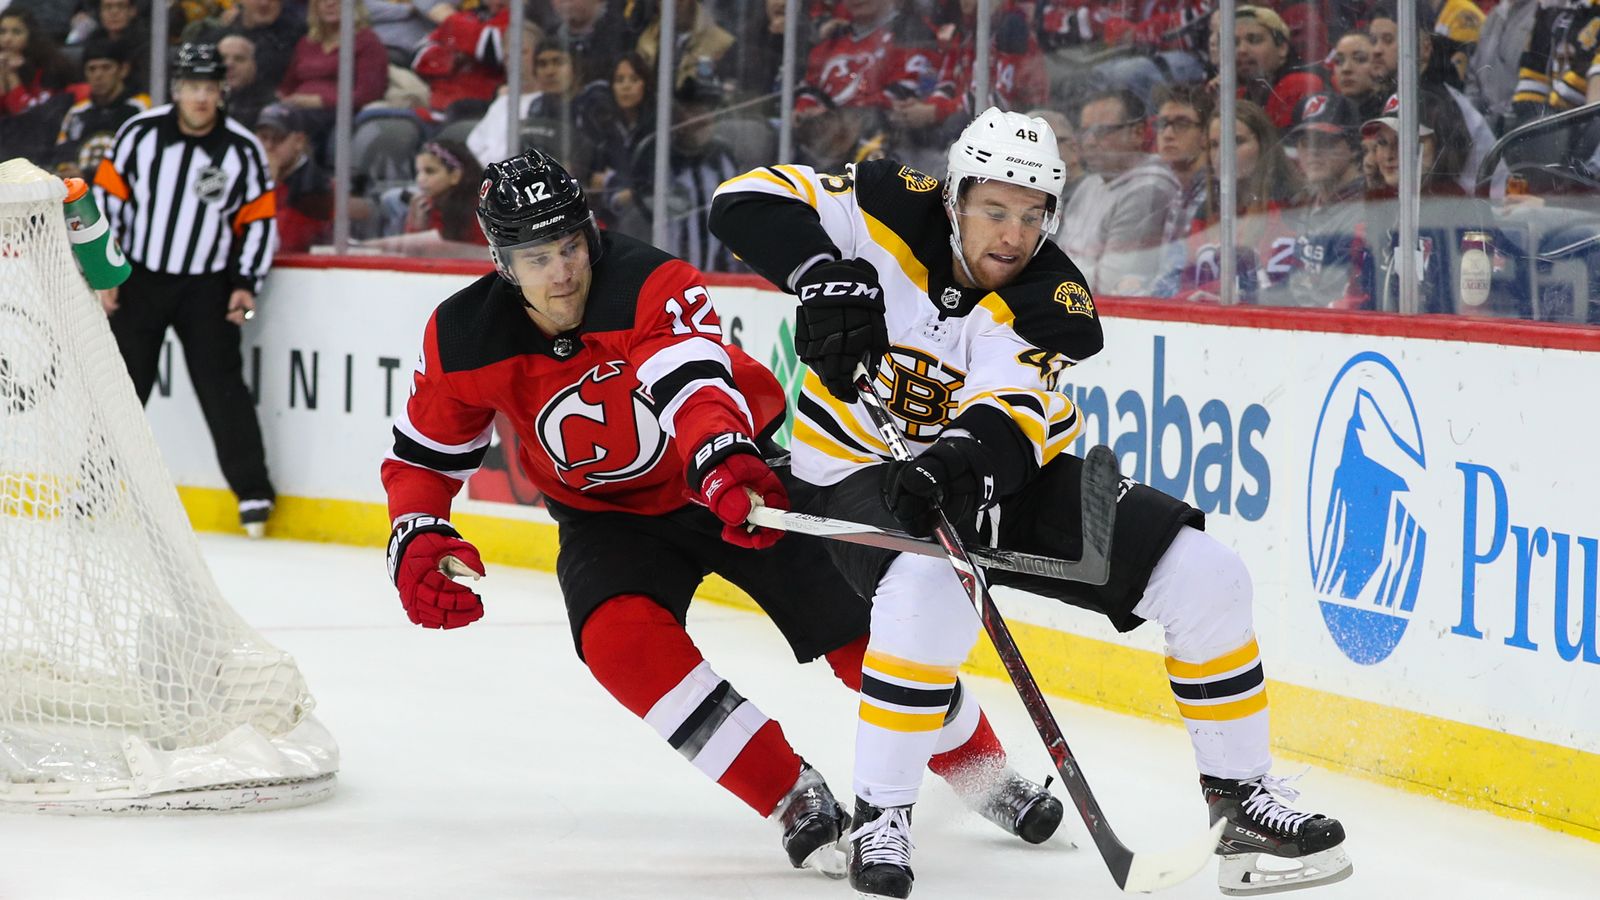 Bruins notebook: Devils need only one goal to beat B's